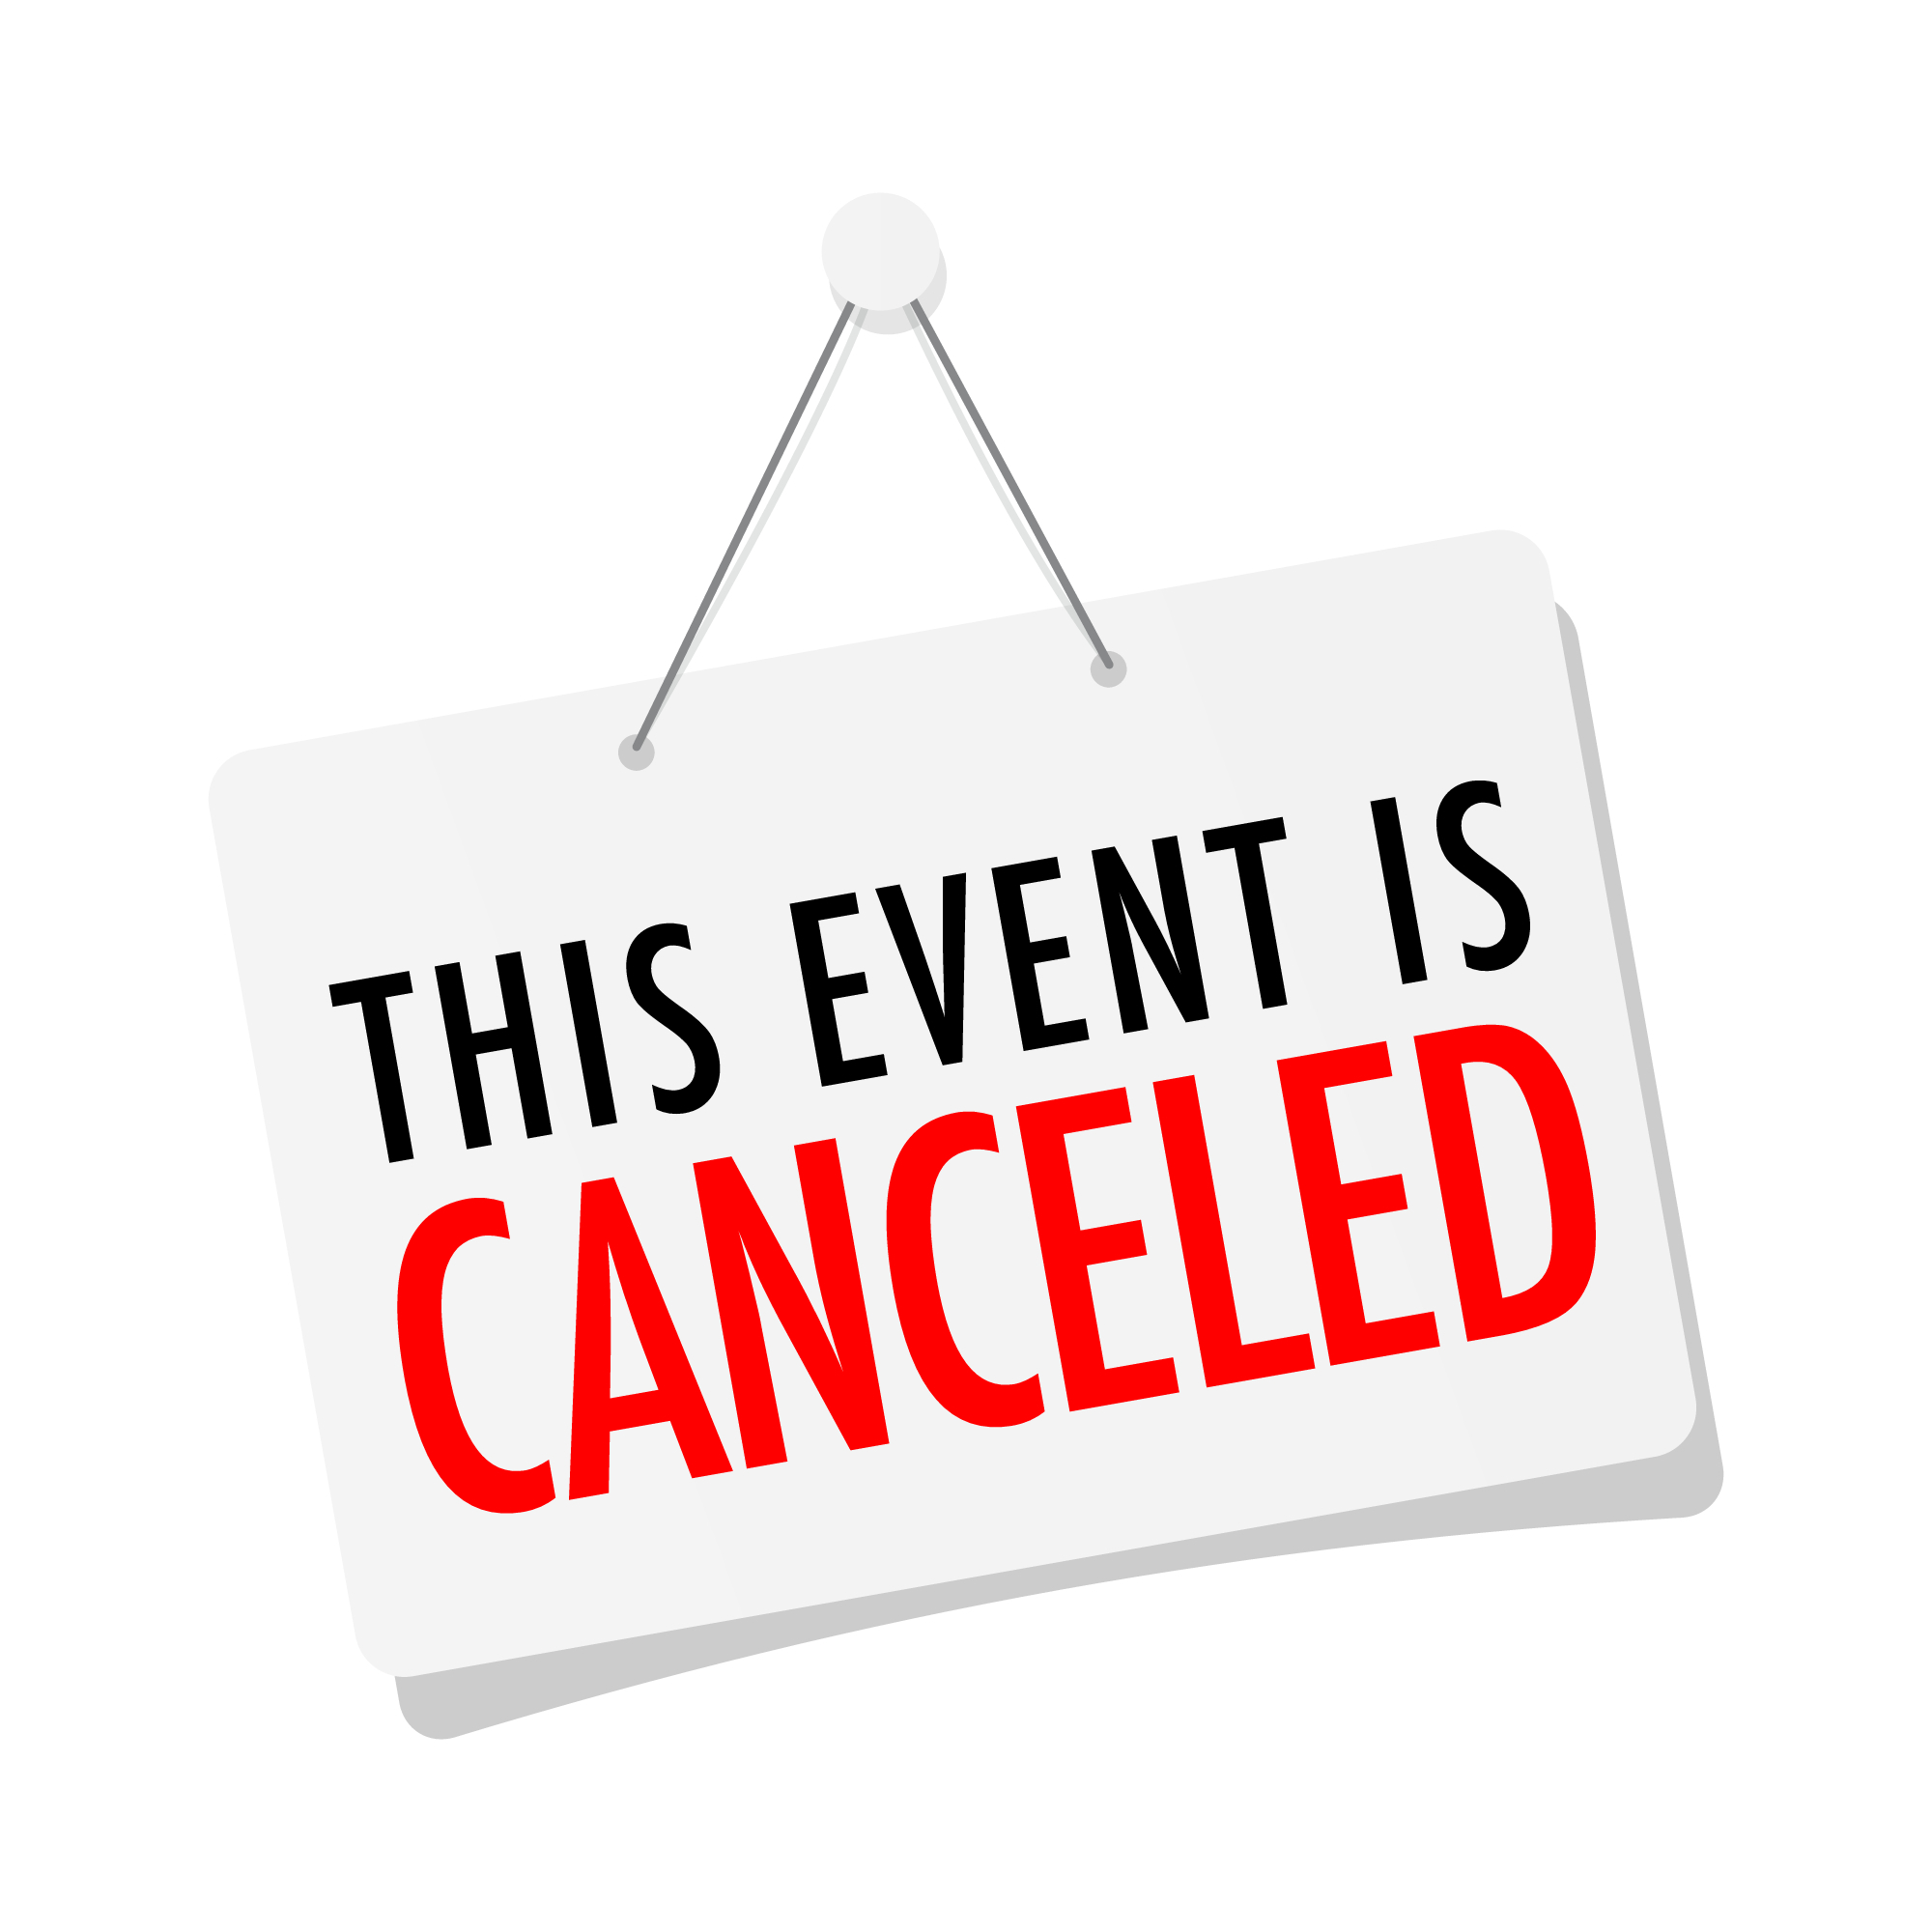 Event cancelled